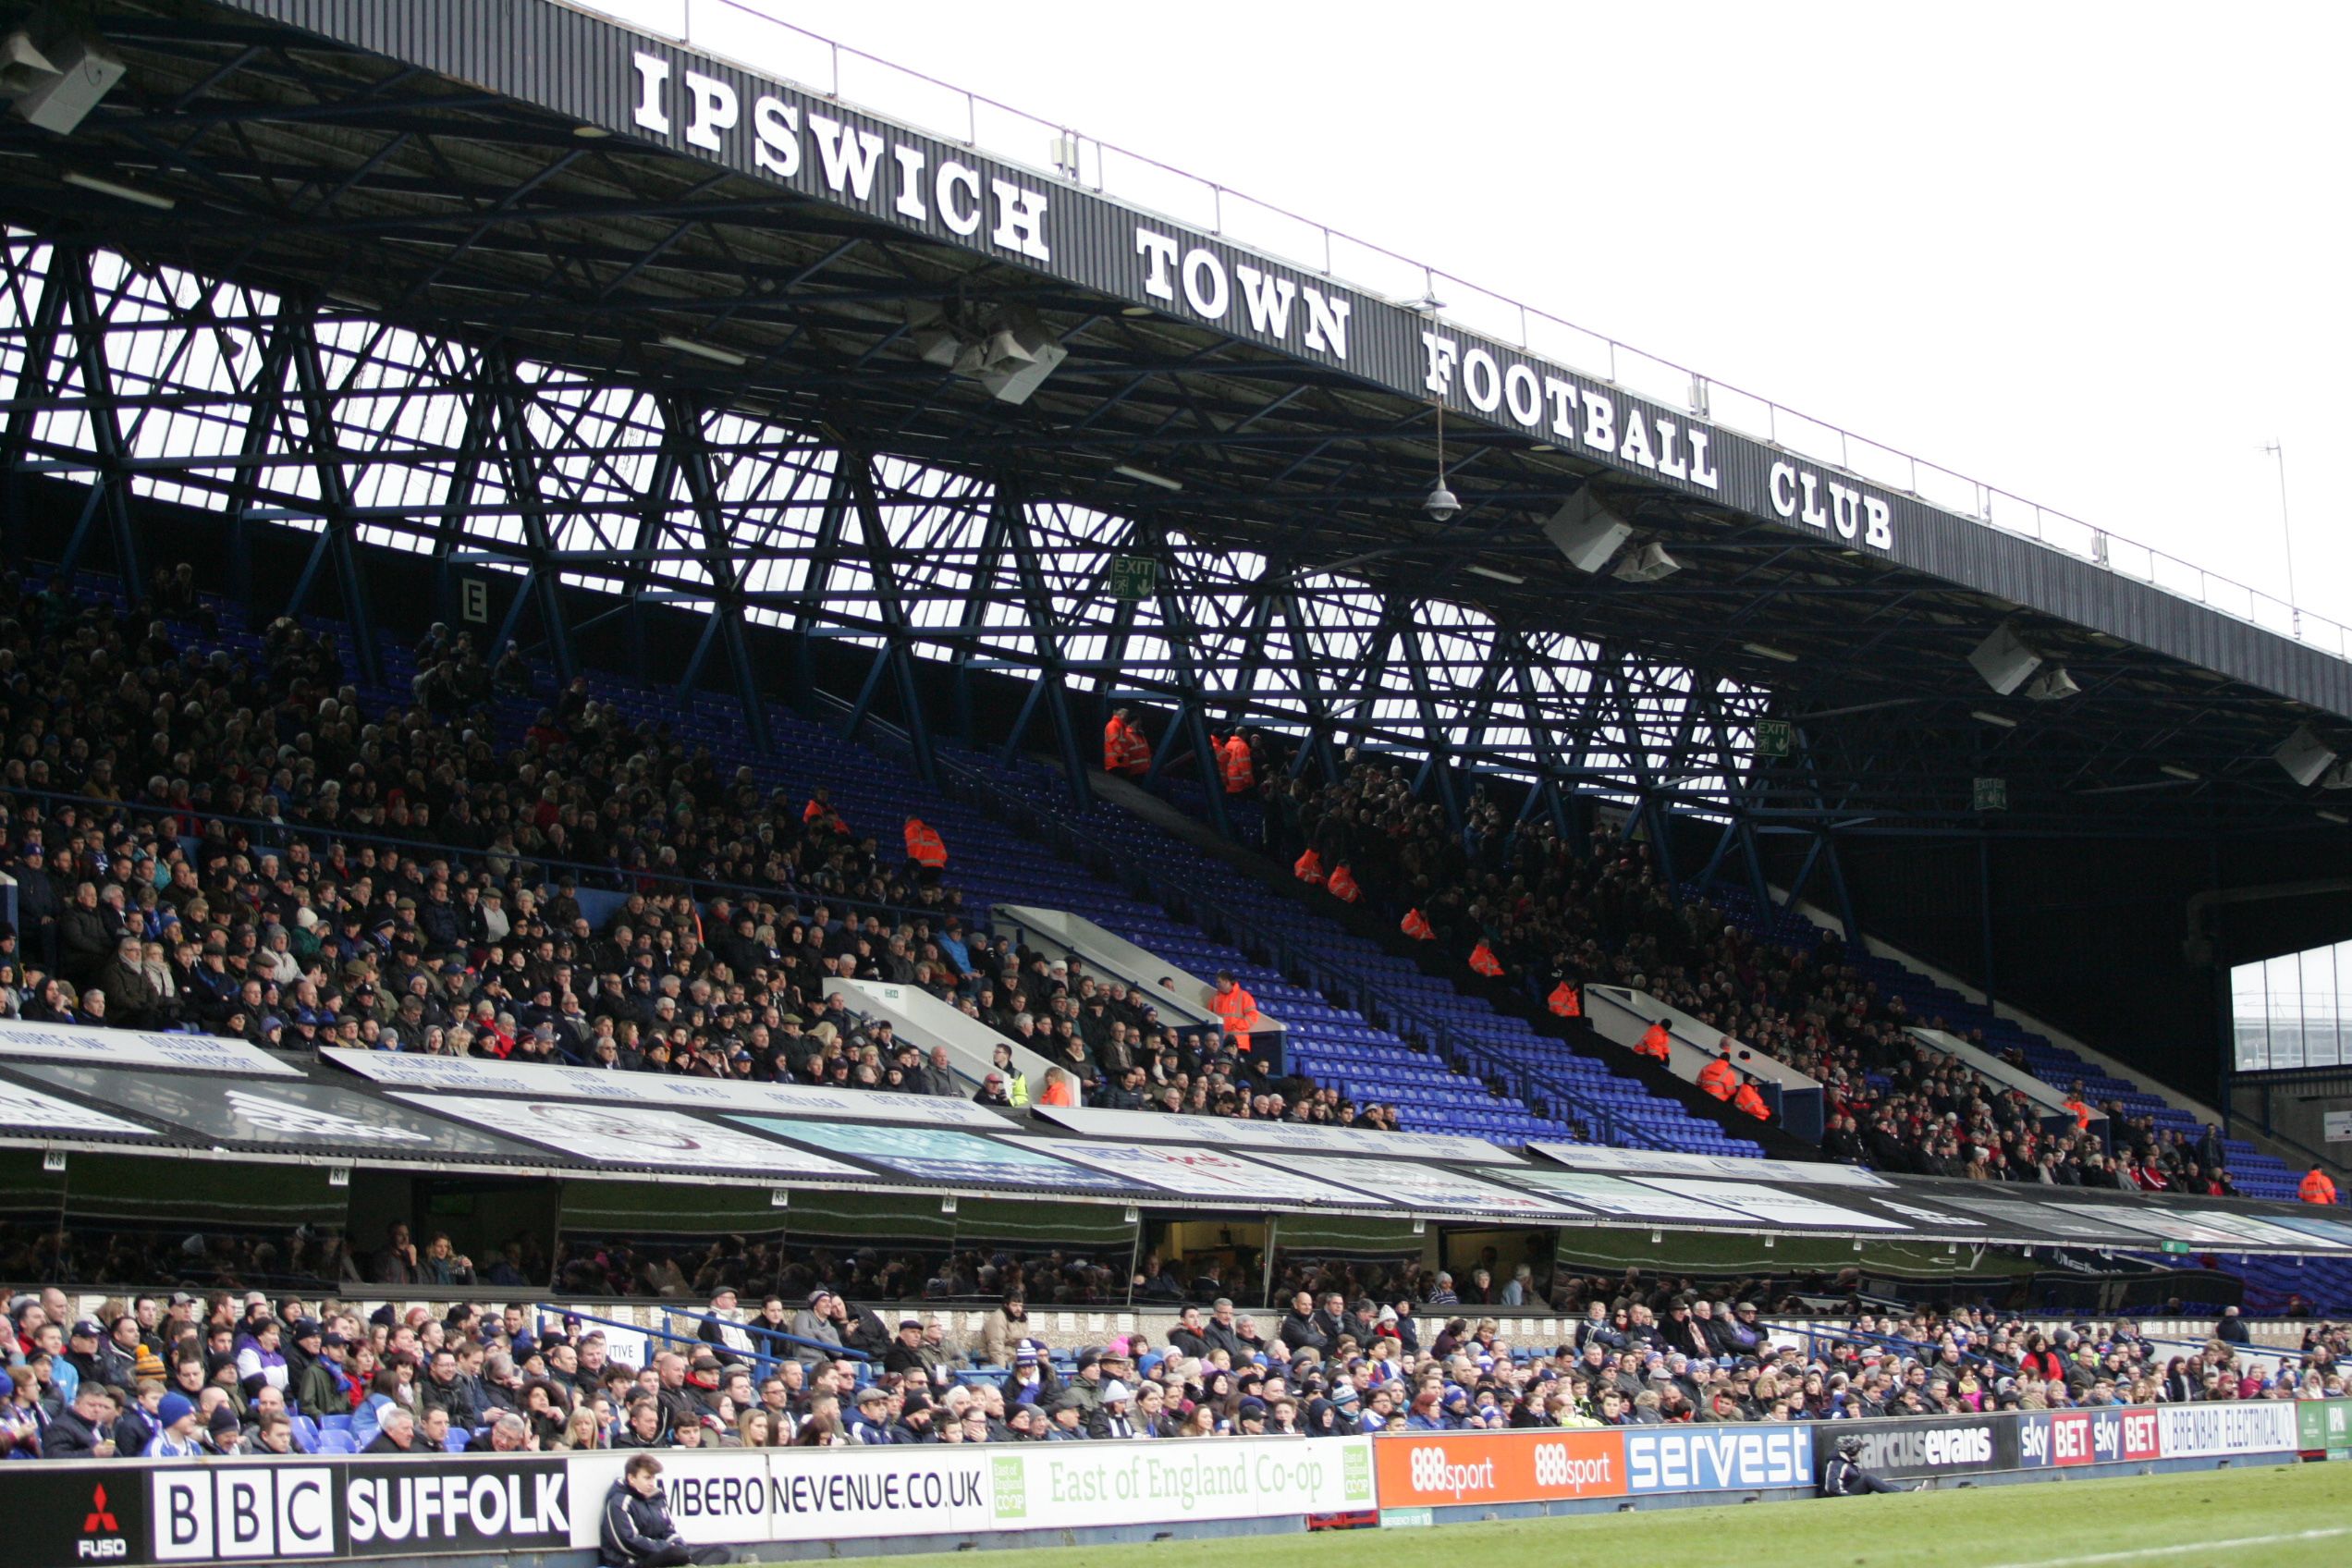 Football Soccer - Ipswich Town v Rotherham United - Sky Bet Football League Championship - Portman Road - 15/16 - 19/3/16 
General view 
Mandatory Credit: Action Images / David Field 
EDITORIAL USE ONLY. No use with unauthorized audio, video, data, fixture lists, club/league logos or 